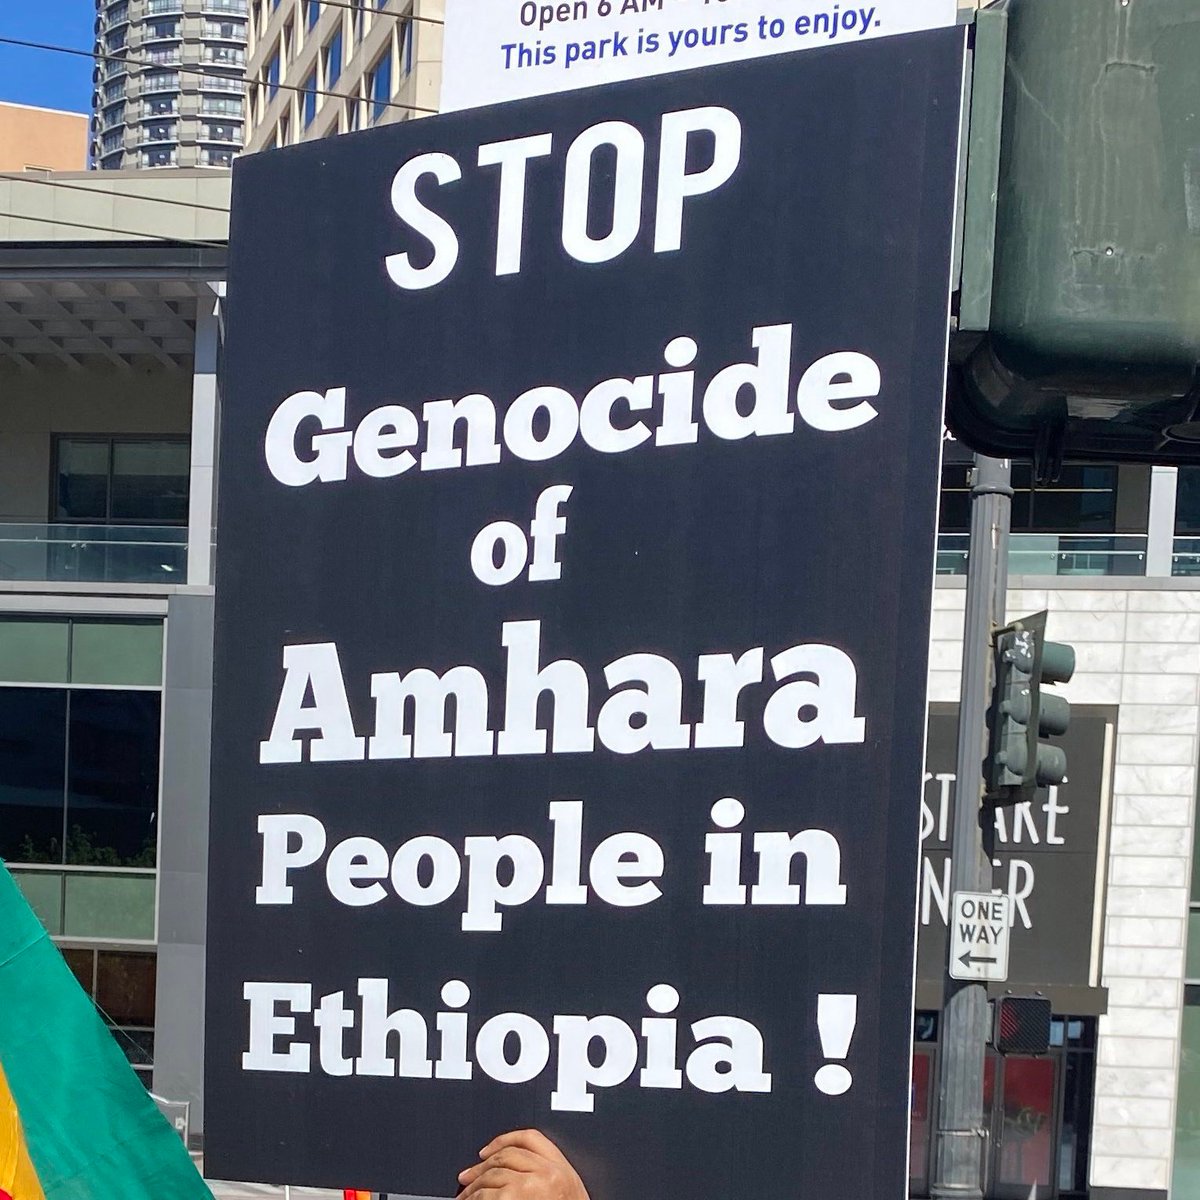 The #WarOnAmhara is a grave human rights crisis. Innocent lives are at risk, and we demand justice and an end to this violence. #AmharaGenocide @amnesty @AJEnglish @USEmbassyAddis @AsstSecStateAF @UN @ClastonB